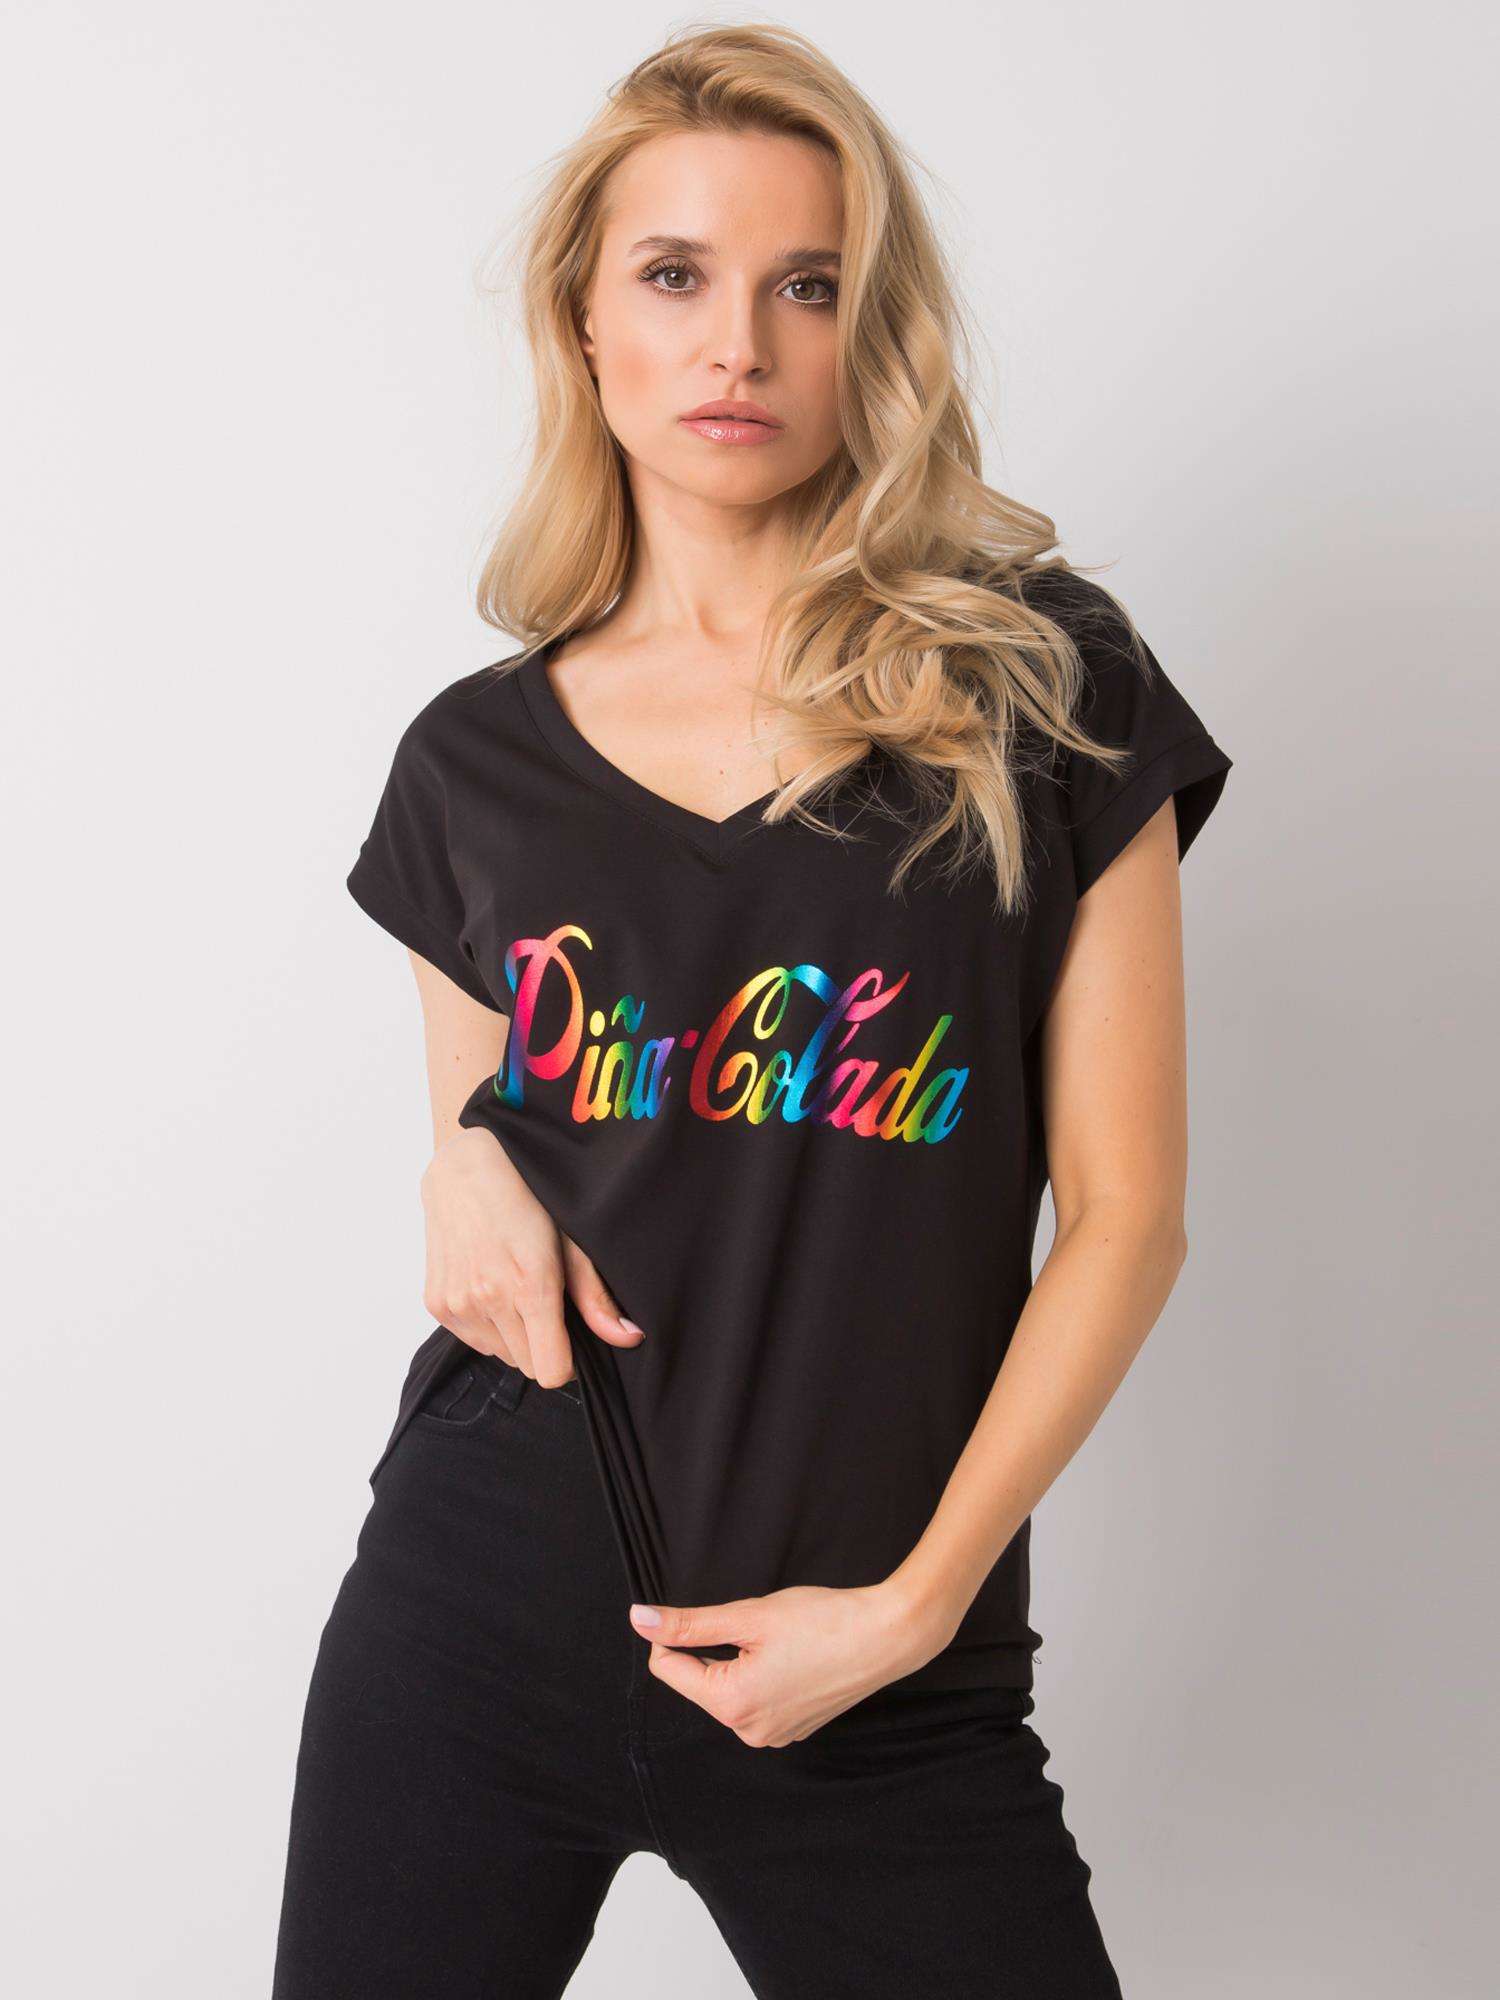 Black t-shirt with a colorful print